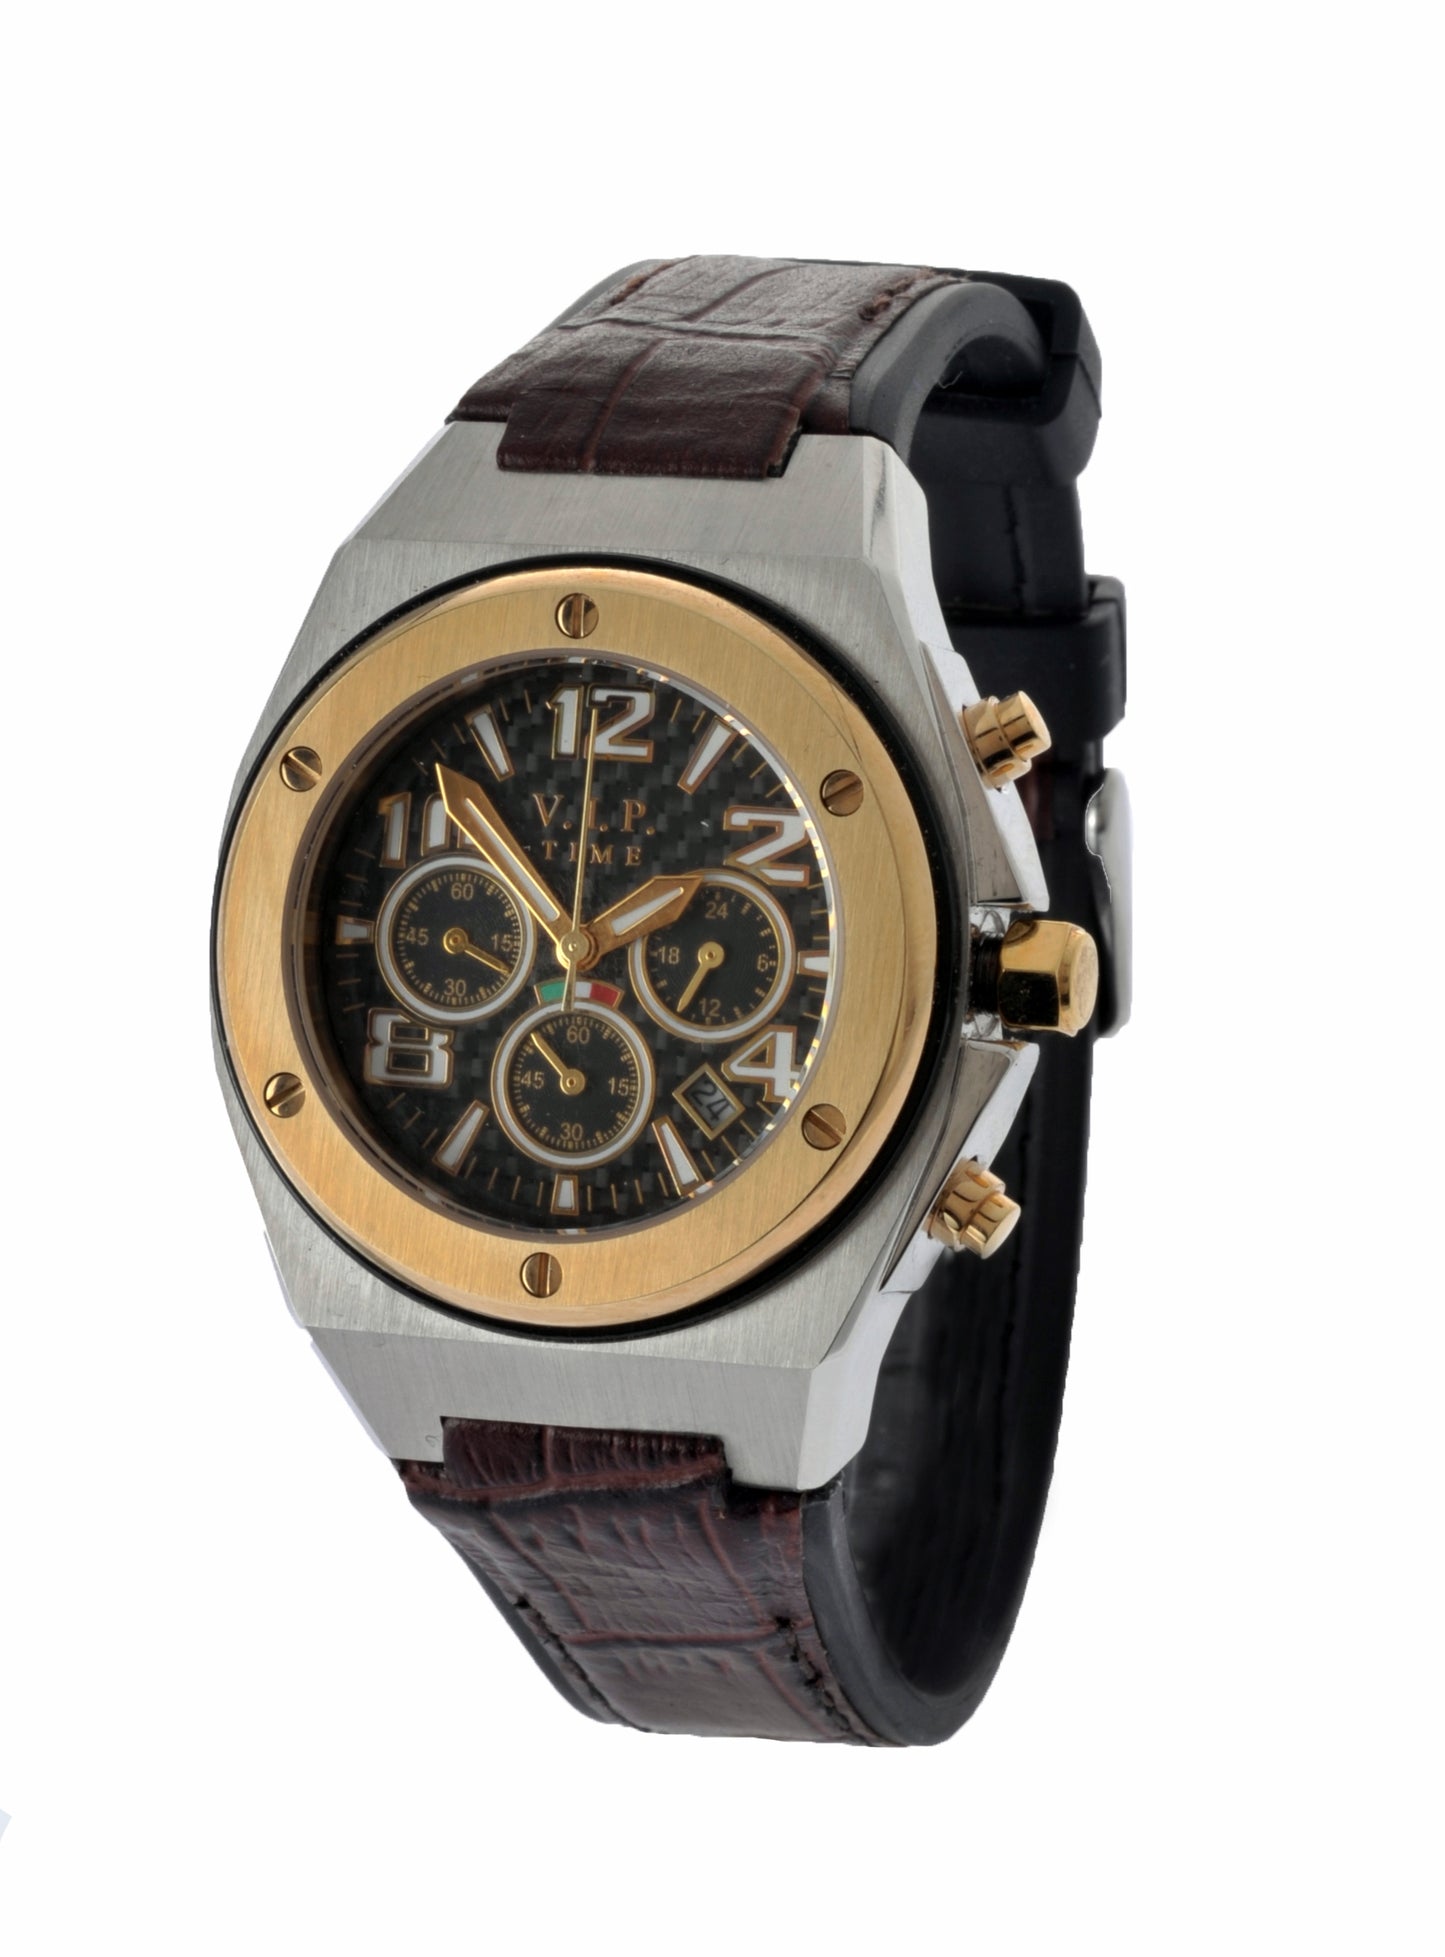 V.I.P. TIME Italy Chronograph Silver-Gold